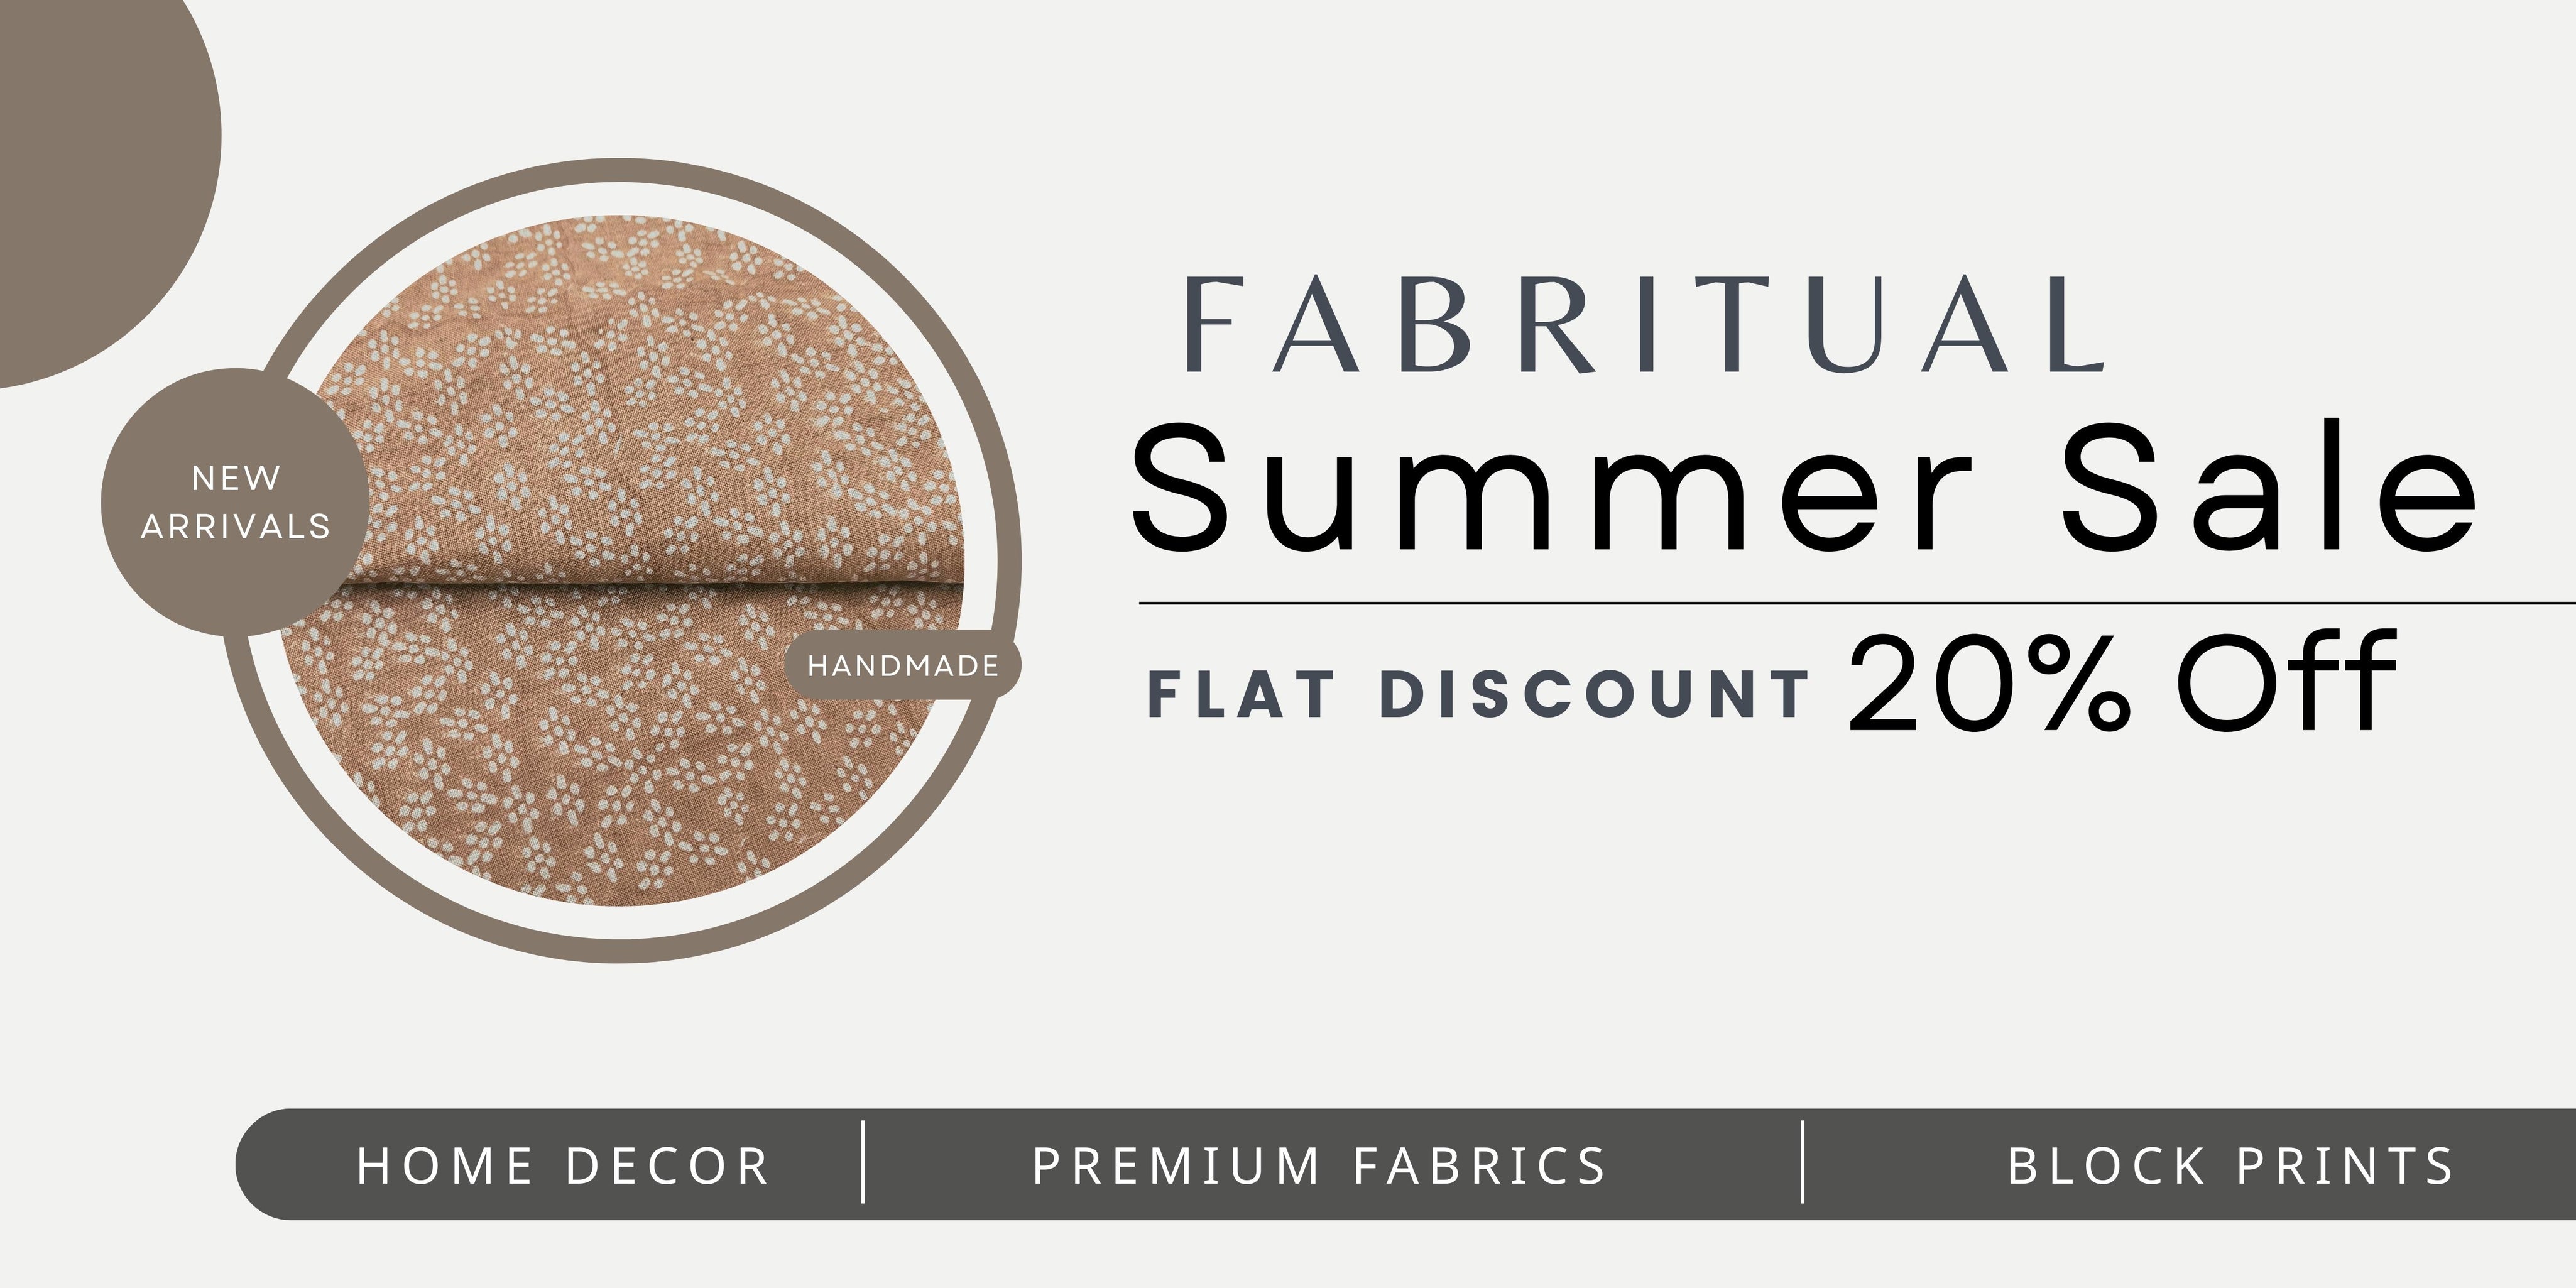 Unleash Your Creativity with Fabritual's Summer Sales: Block Print Fabrics for Home Decor - Fabritual